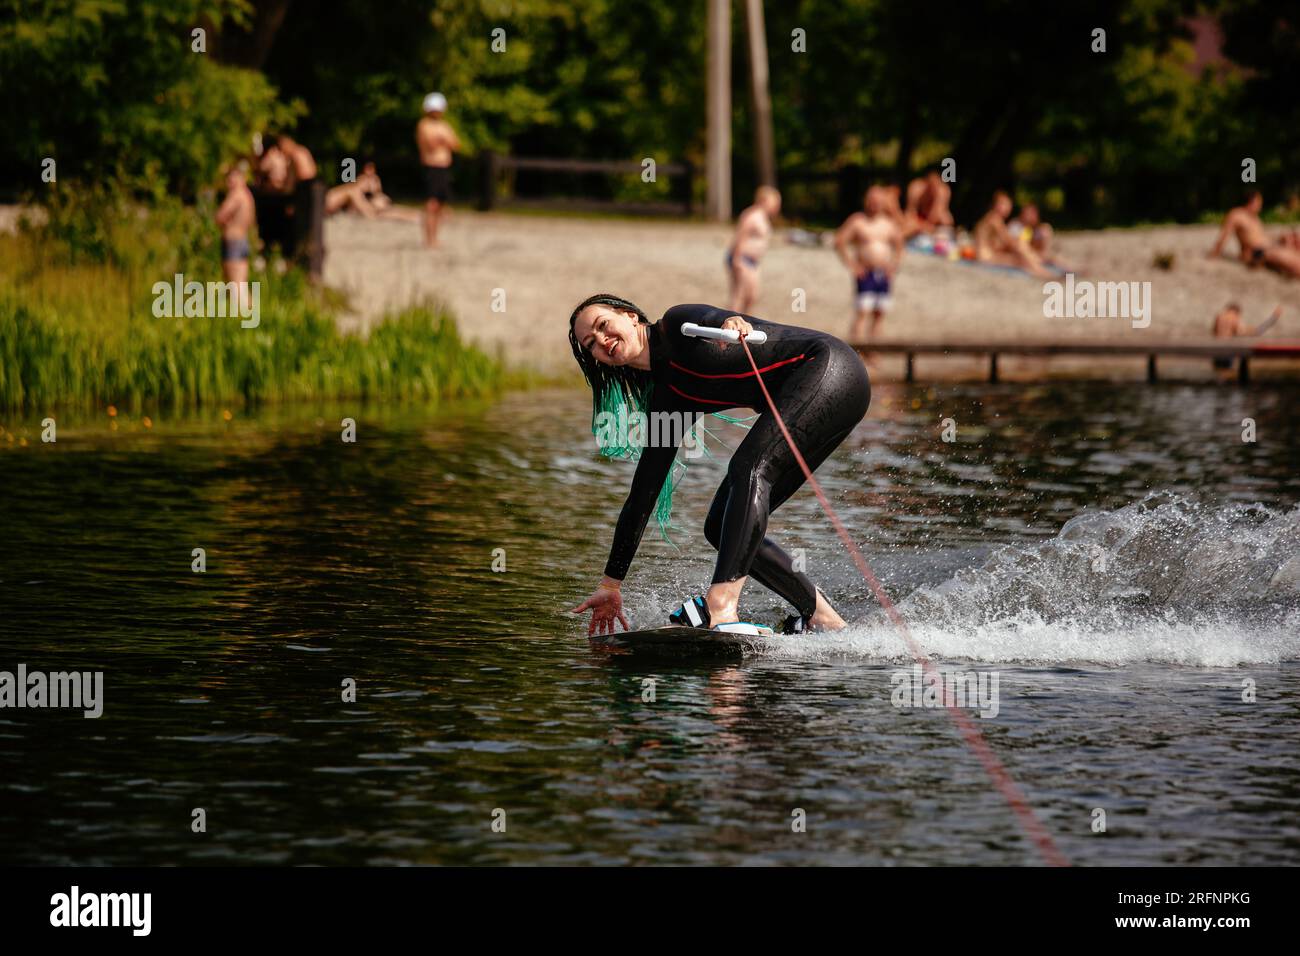 A girl in a wetsuit stands on a wakeboard on the river. Stock Photo